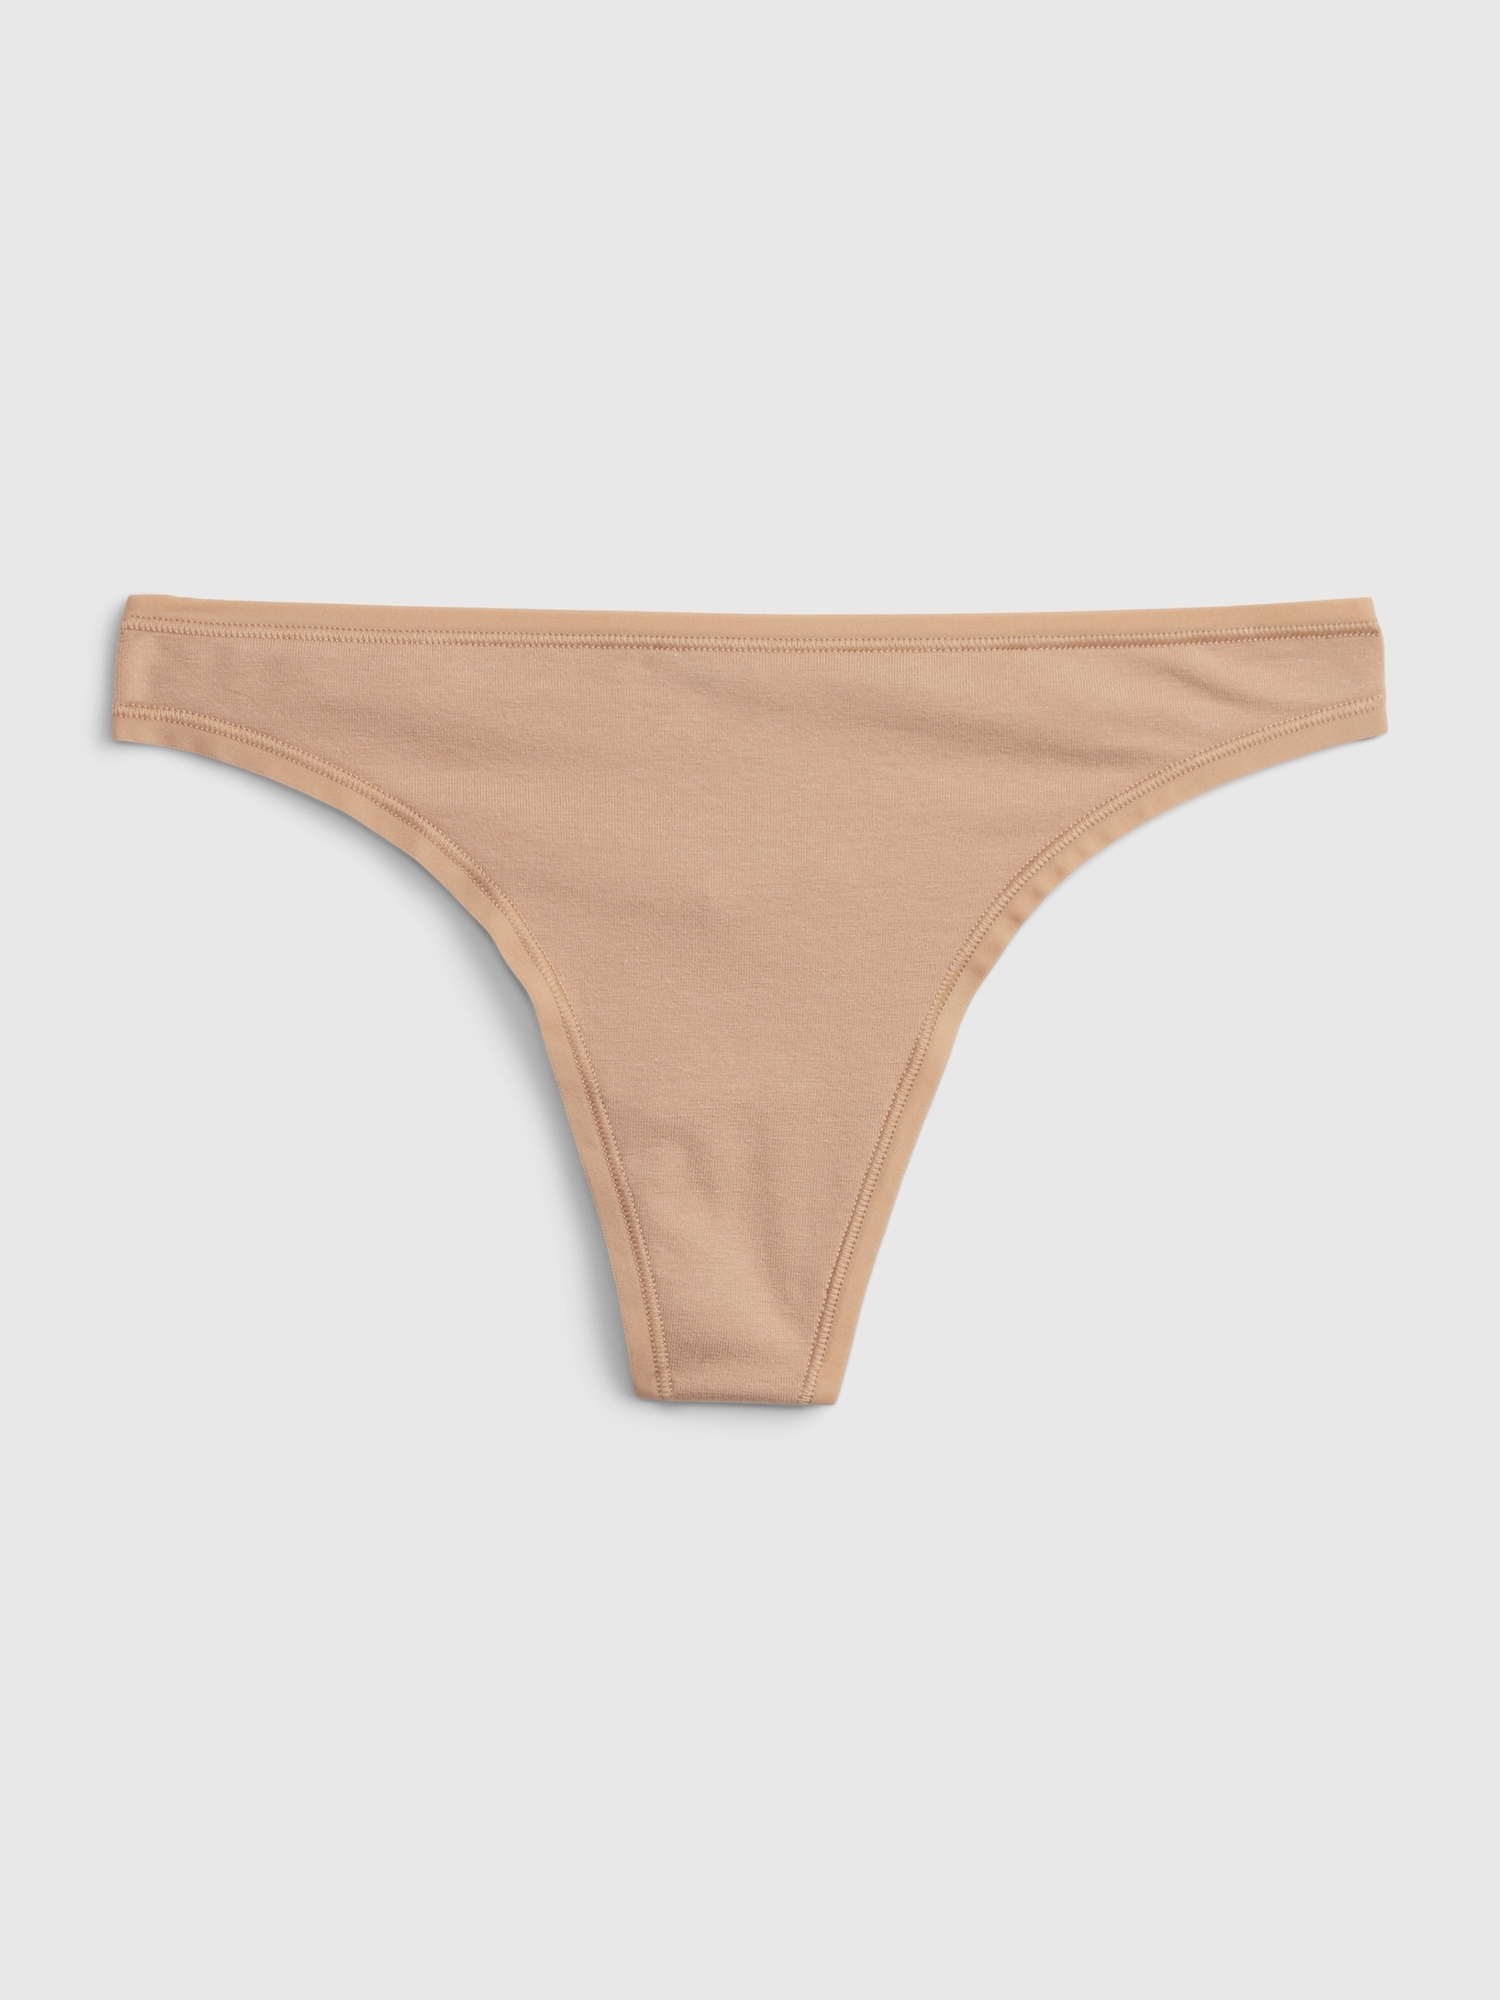 ANGLED THONG, ORGANIC COTTON JERSEY, GOLDEN PALM, 23-25-141